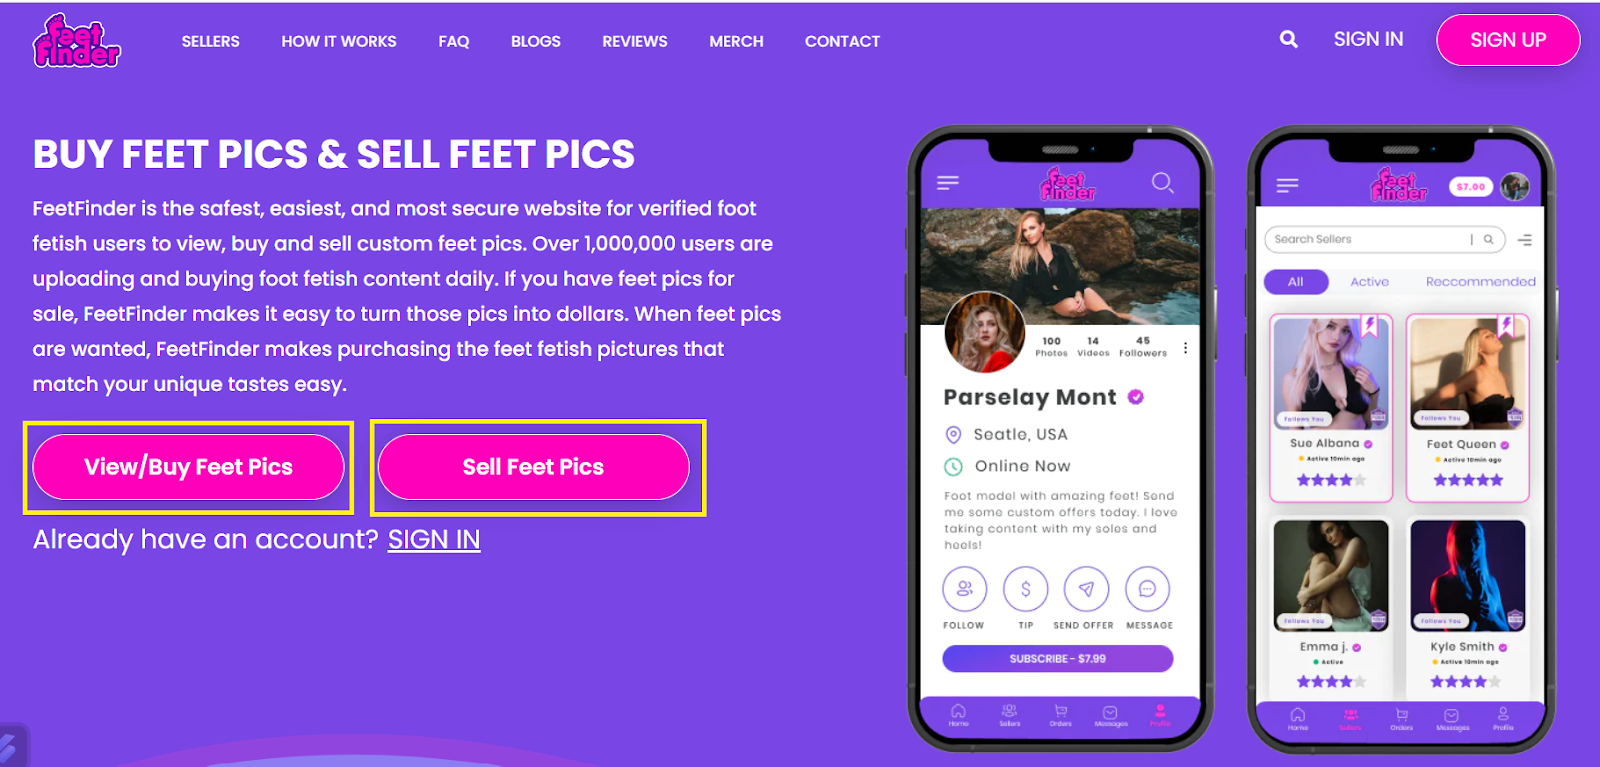 Buy and sell feet pics on FeetFinder